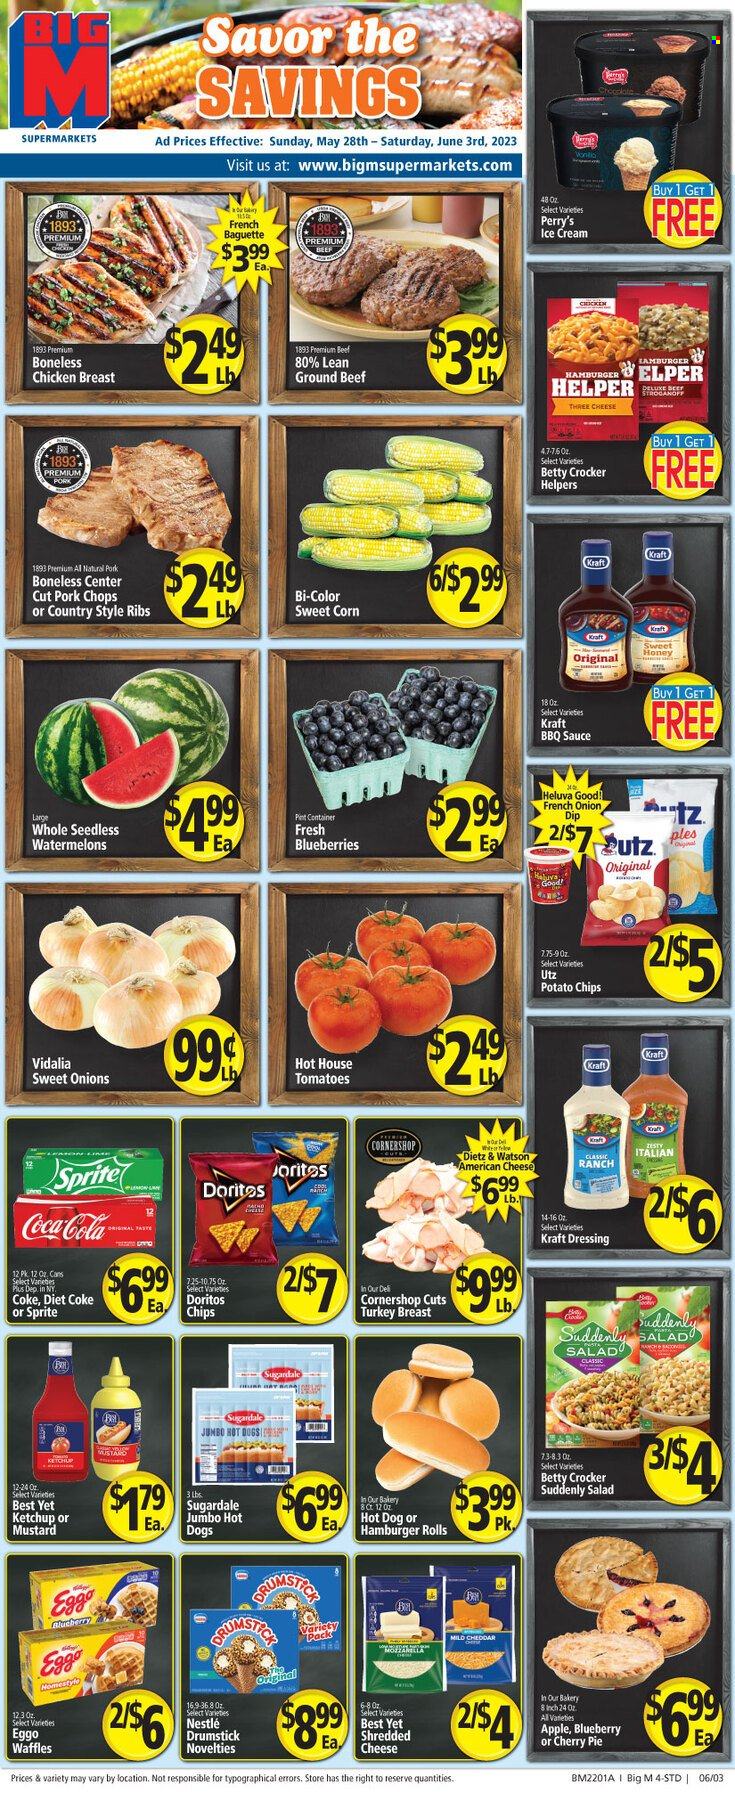 thumbnail - Big M Flyer - 05/28/2023 - 06/03/2023 - Sales products - baguette, pie, burger buns, waffles, cherry pie, corn, salad, sweet corn, blueberries, watermelon, cherries, hot dog, hamburger, sauce, Kraft®, Sugardale, Dietz & Watson, american cheese, mild cheddar, shredded cheese, cheese, dip, ice cream, ice cones, Nestlé, Doritos, potato chips, chips, salty snack, BBQ sauce, mustard, ketchup, dressing, Coca-Cola, Sprite, Diet Coke, soft drink, Coke, chicken, beef meat, ground beef, ribs, pork chops, pork meat, pork ribs, country style ribs. Page 1.